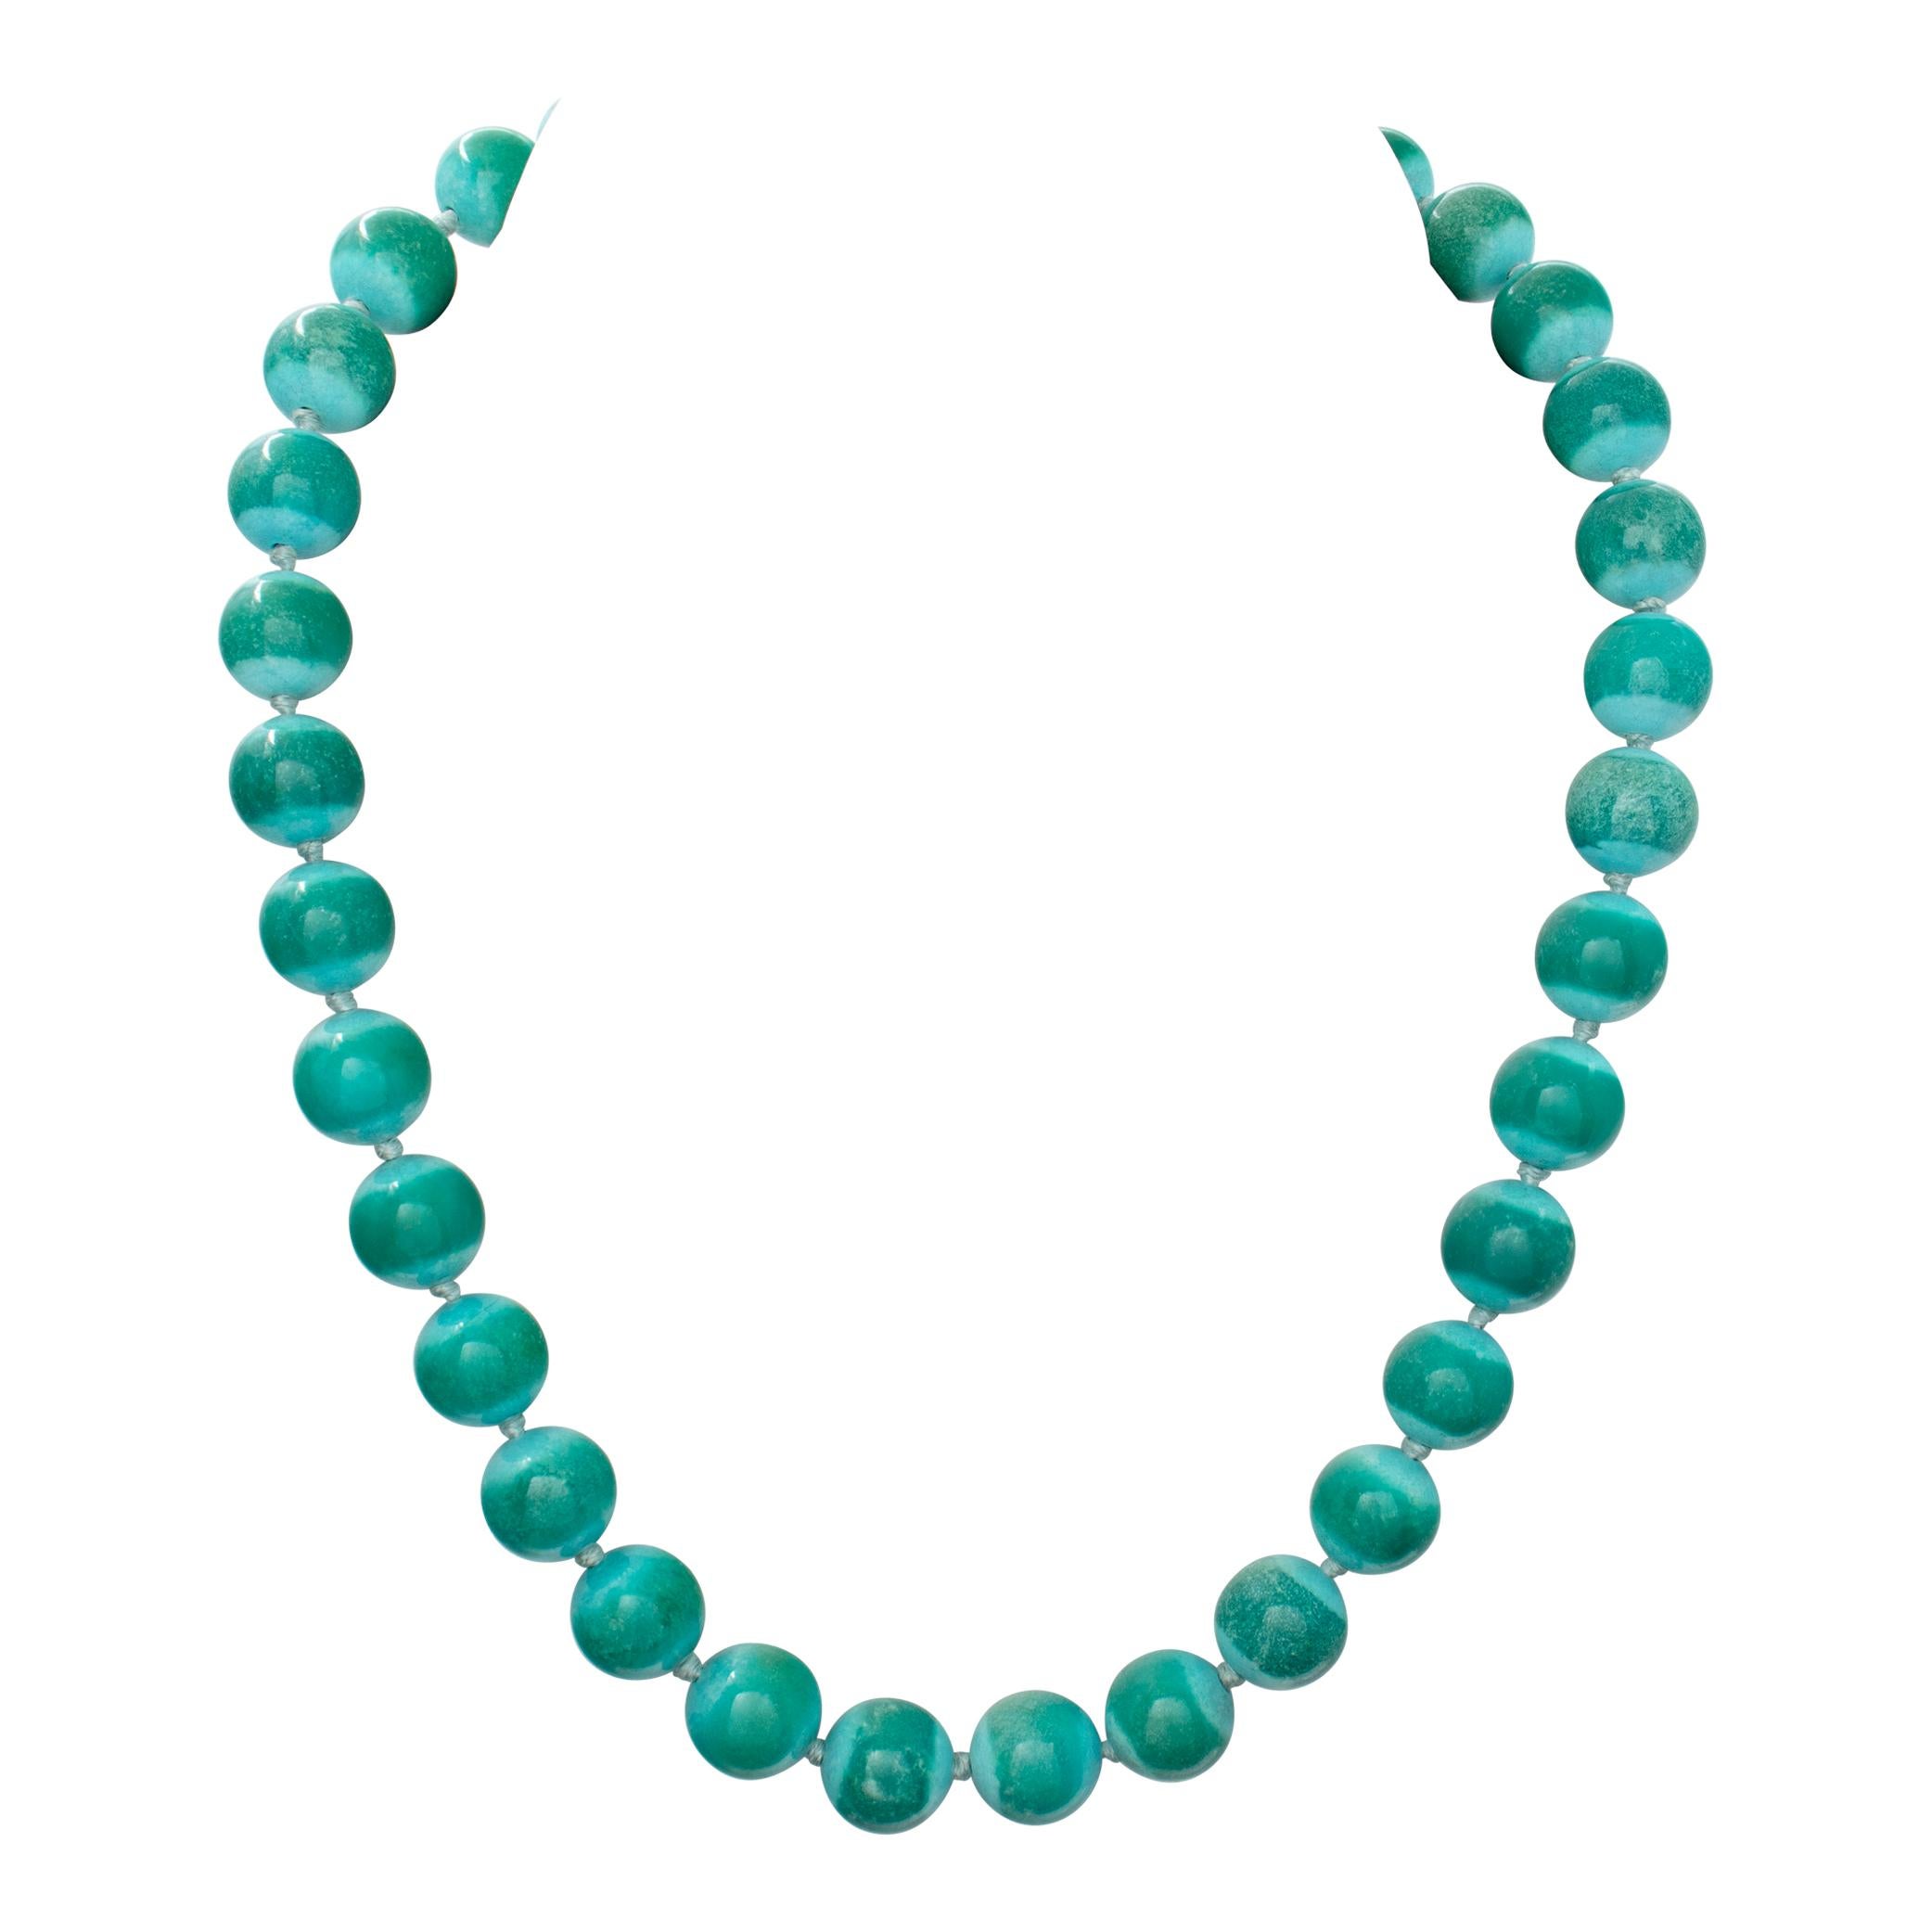 Angela Cummings Turquoise Bead Necklace with 18k gold clasp For Sale